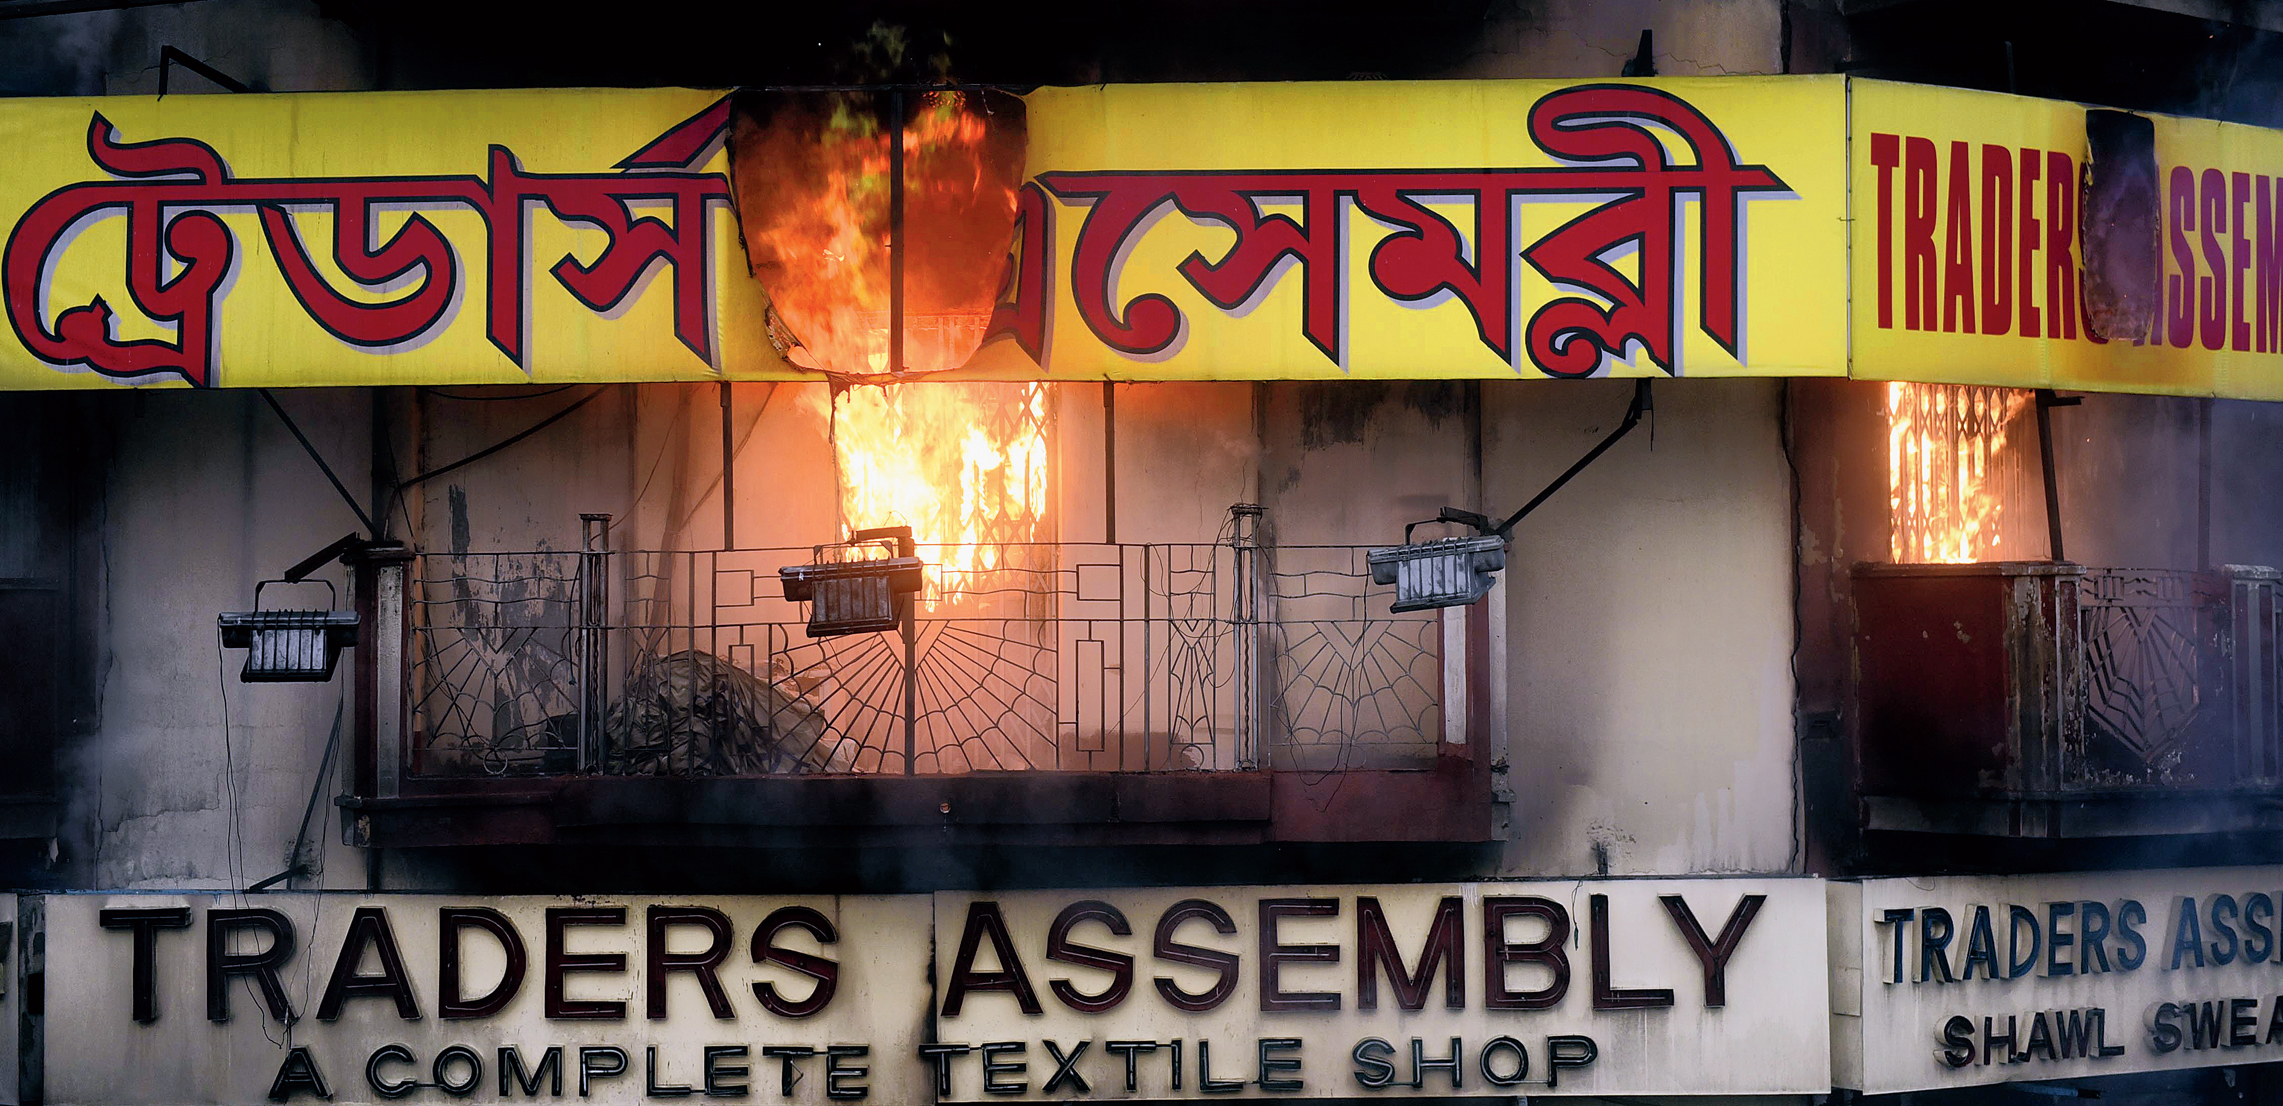 The fire, raging inside the Traders Assembly on Sunday, devoured a part of the signage that had for long been a hard-to-miss feature of the Gariahat skyline. 